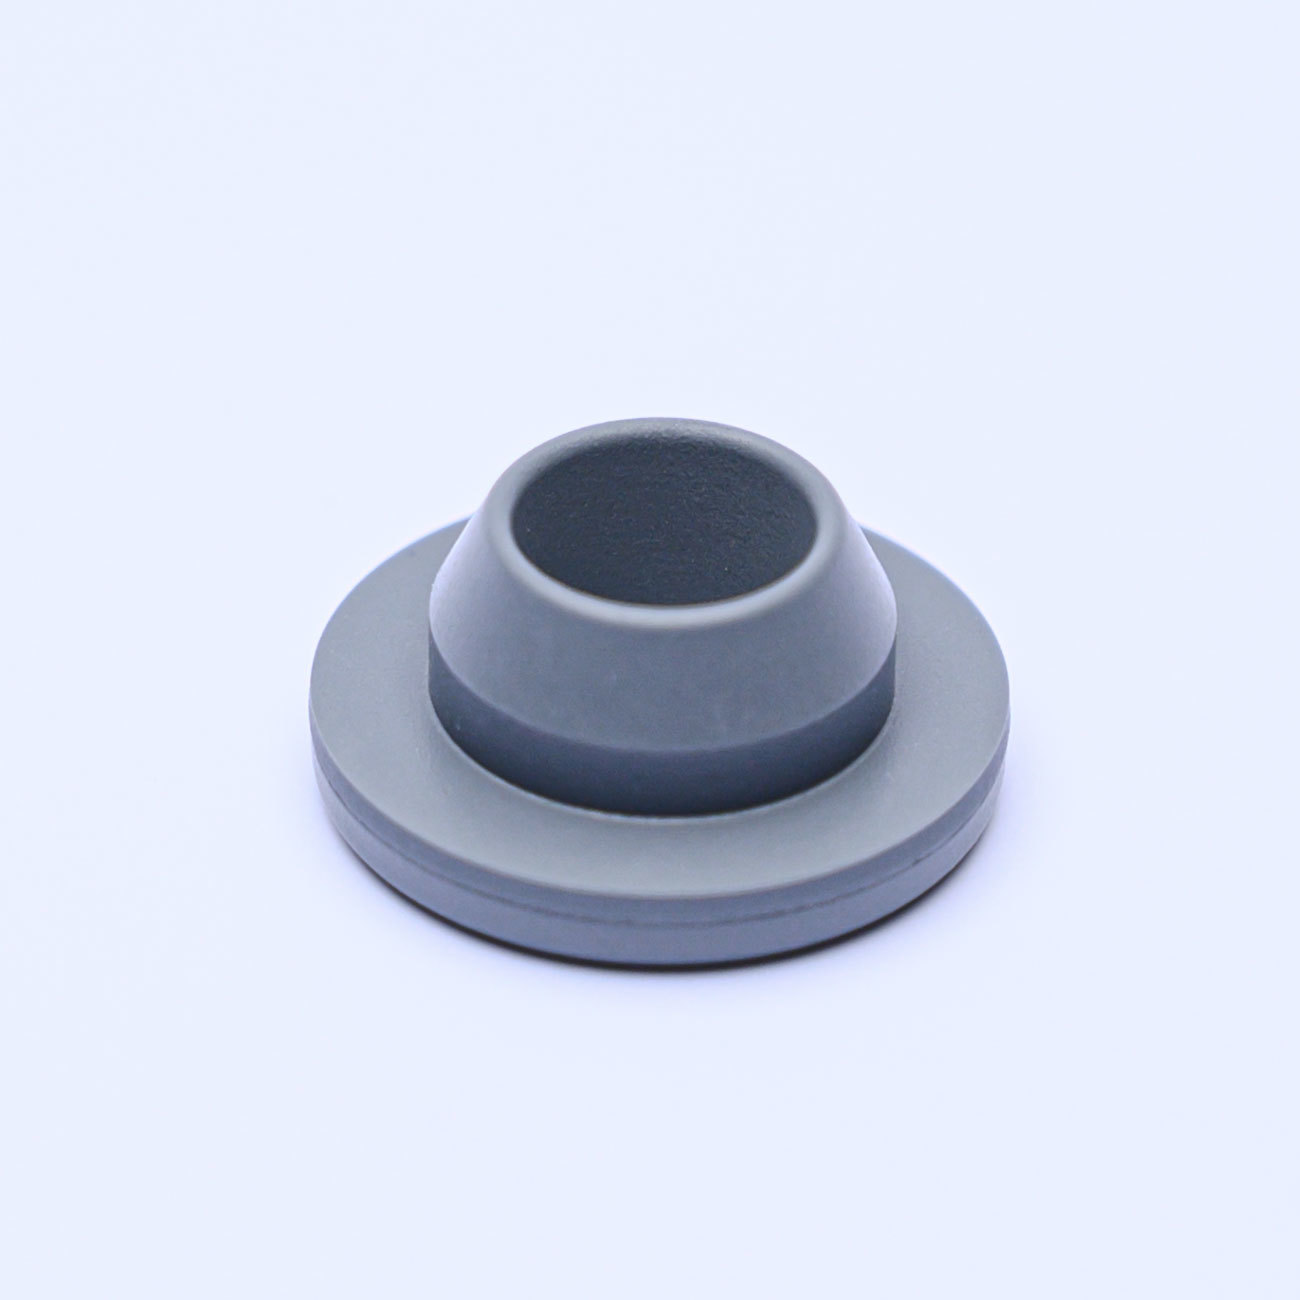 Halogenated butyl rubber stopper for sterile powder for injection